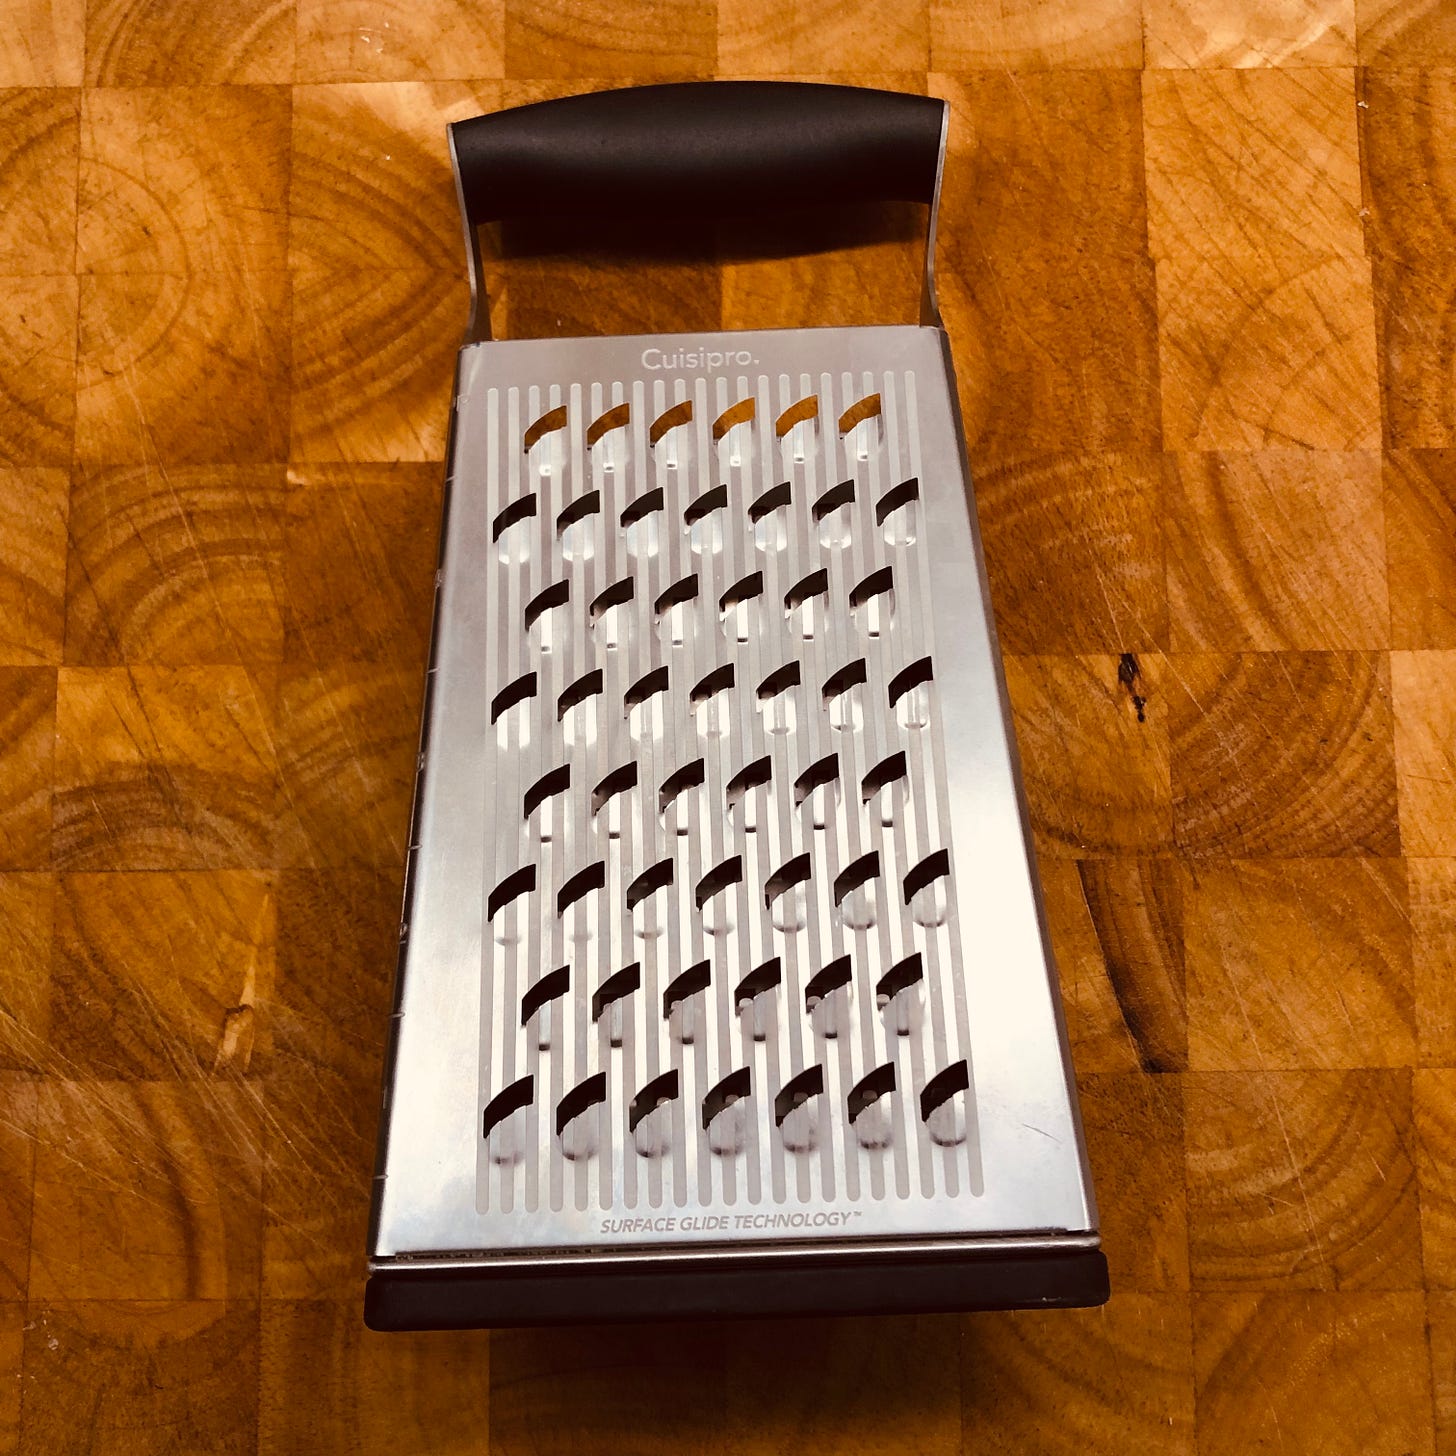 One side of the Cuisipro 4-Side Box Grater, showing the largest grating holes